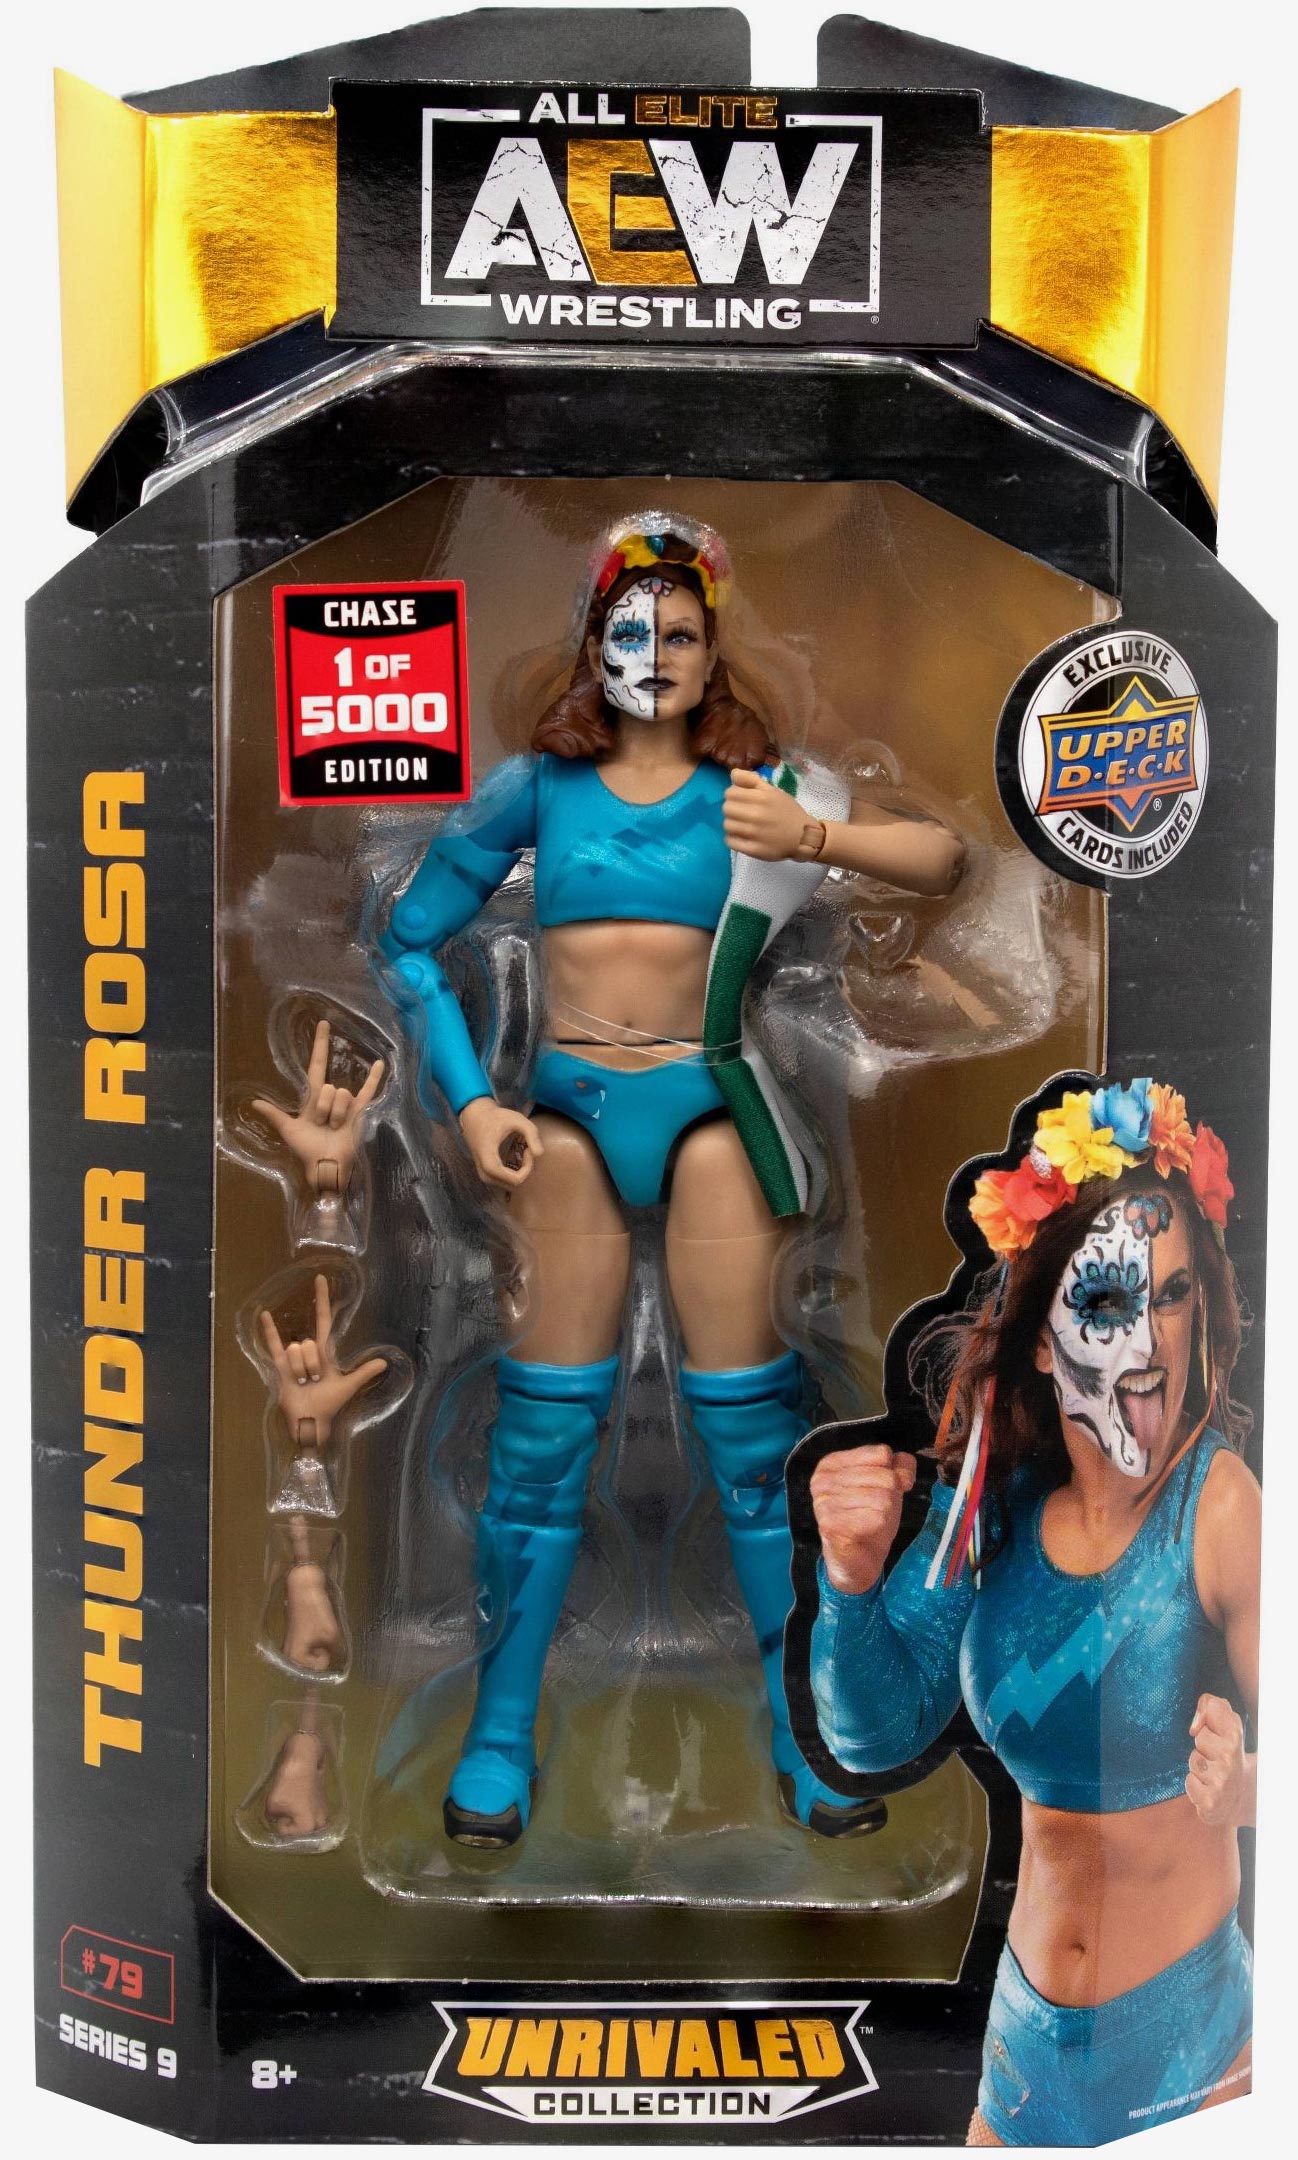 Thunder Rosa - AEW Unrivaled Collection Series #9 (Chase Edition)